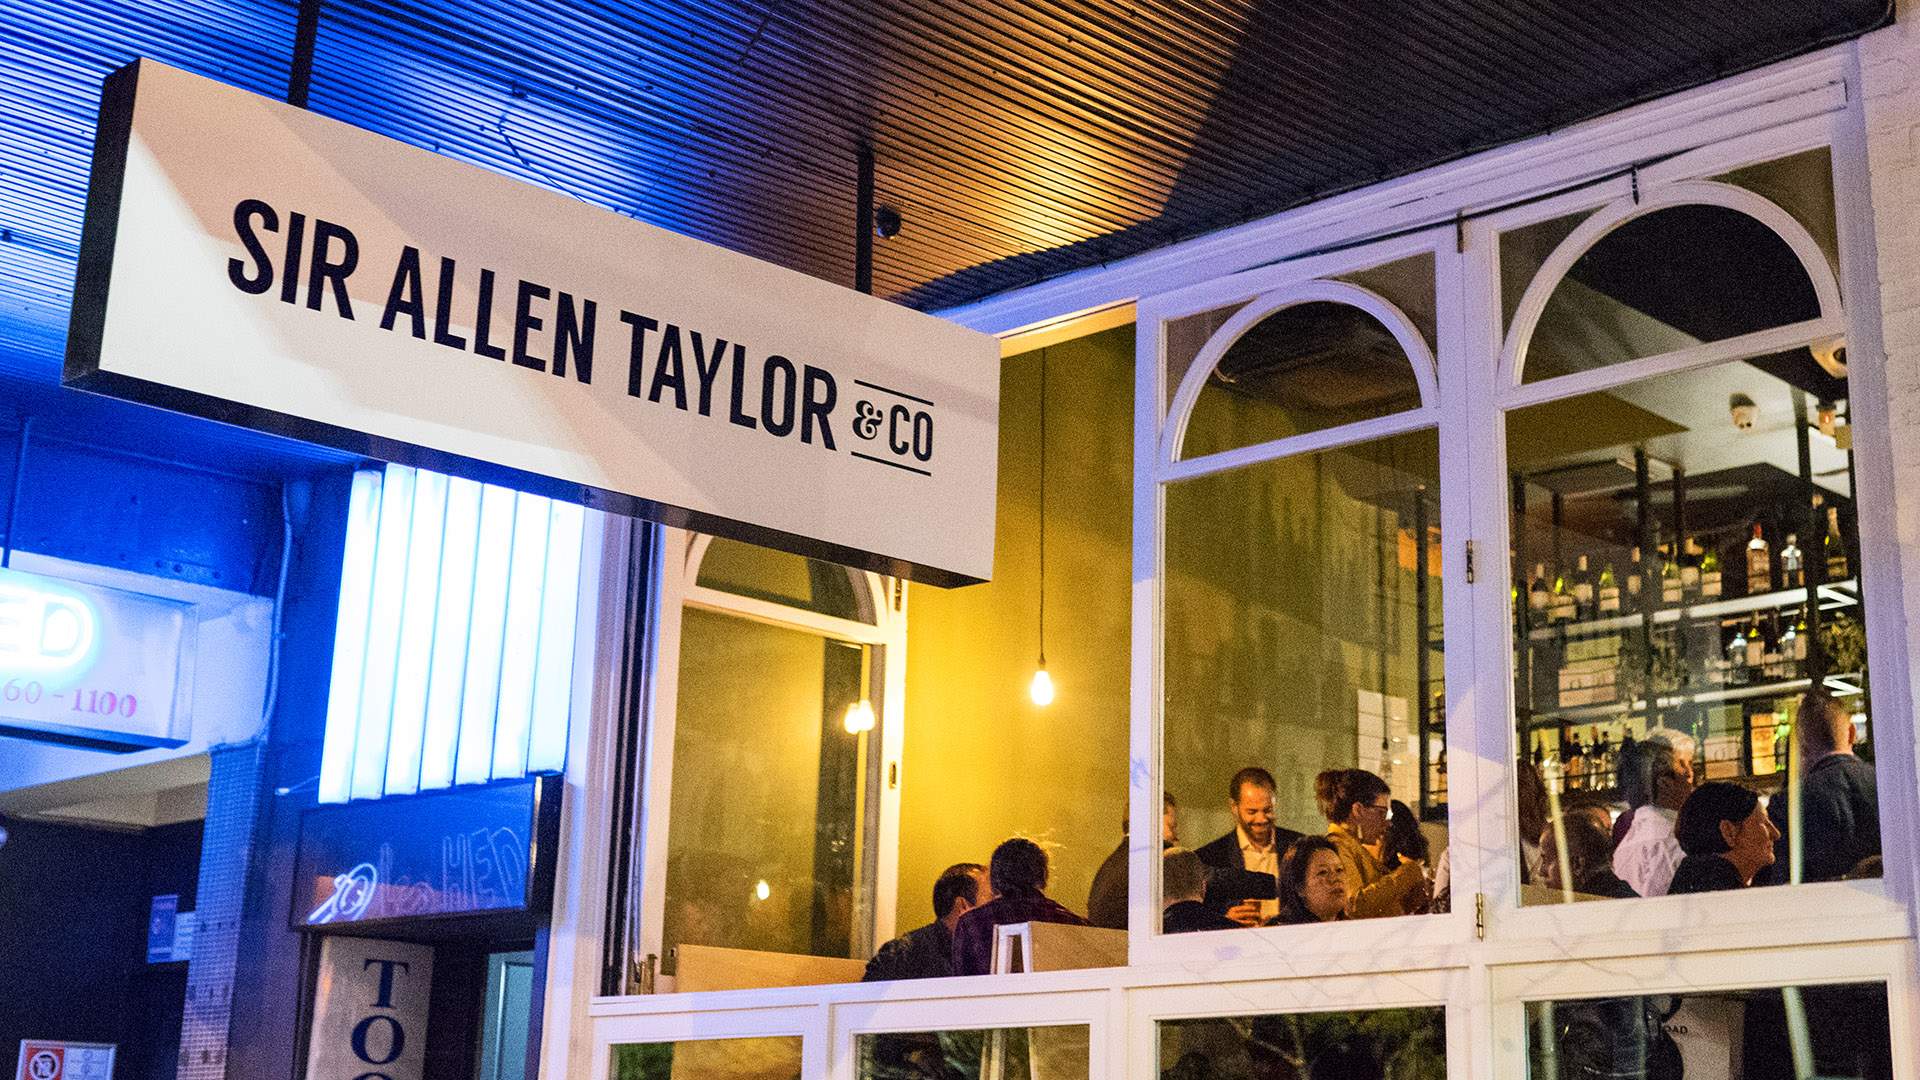 Oxford Street's New Bar and Restaurant Pays Tribute to Taylor Square's Designer